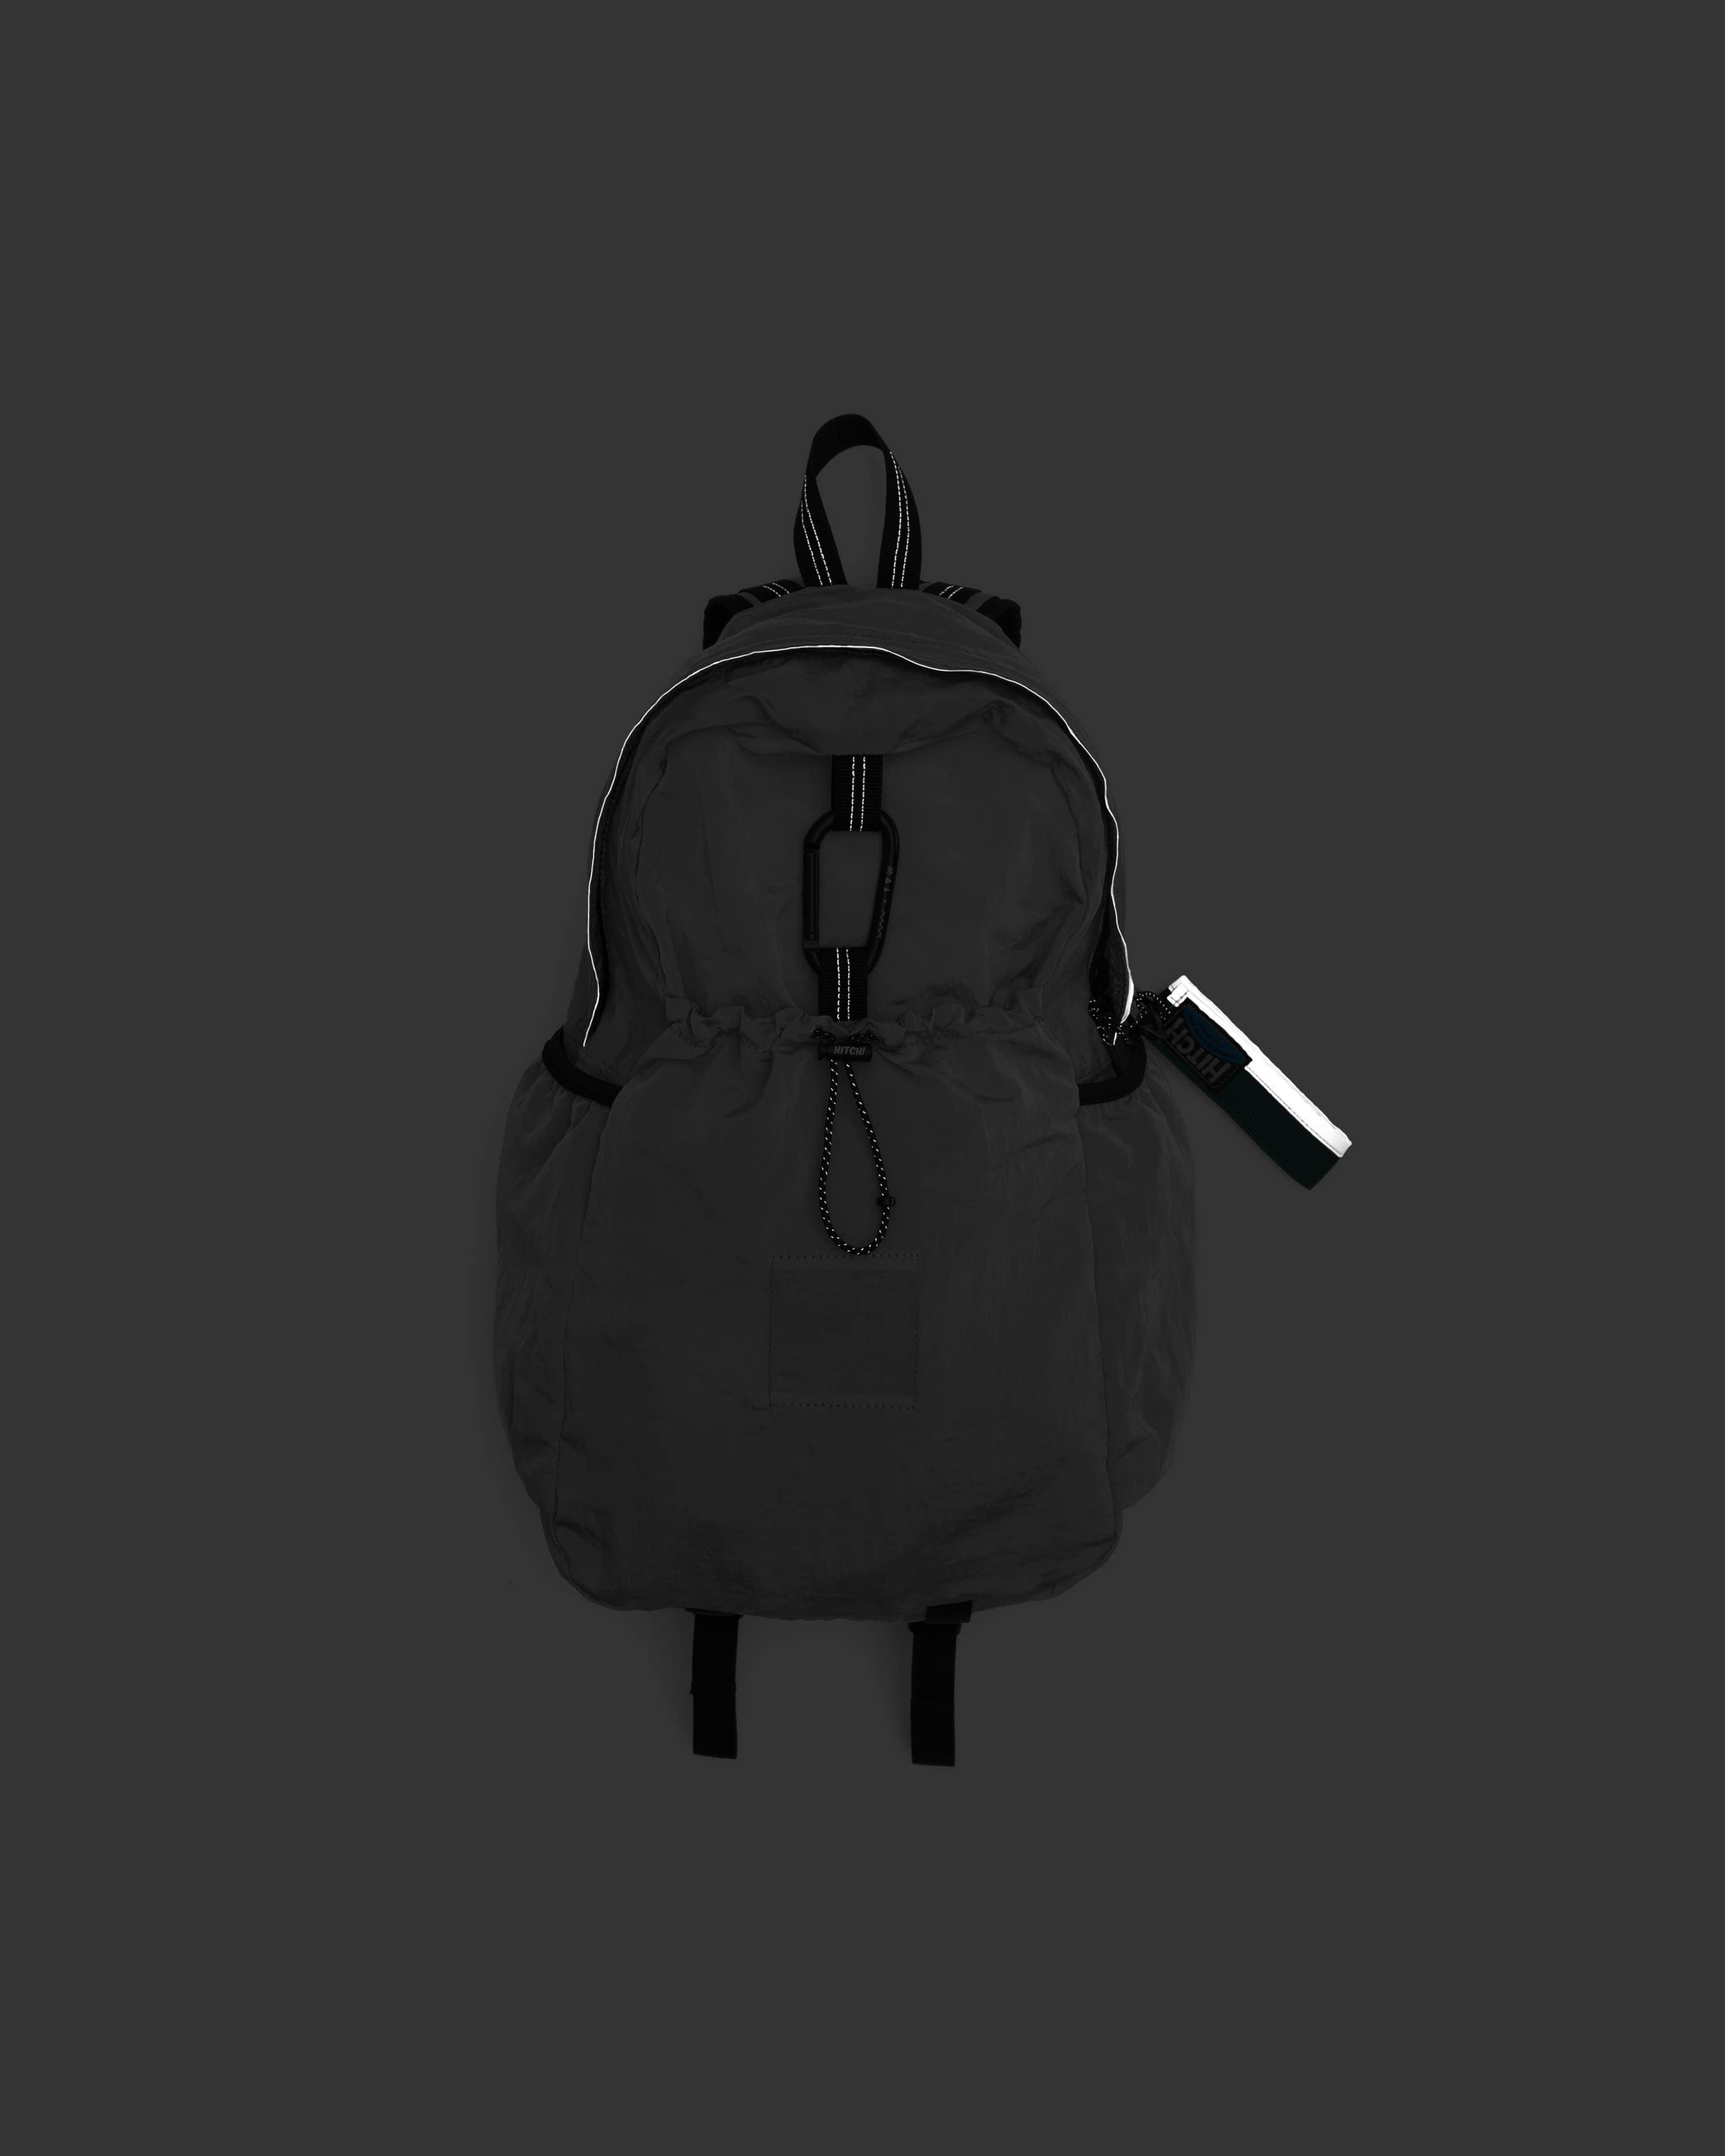 [out of stock] HITCH x mmo Backpack (085) - Gray